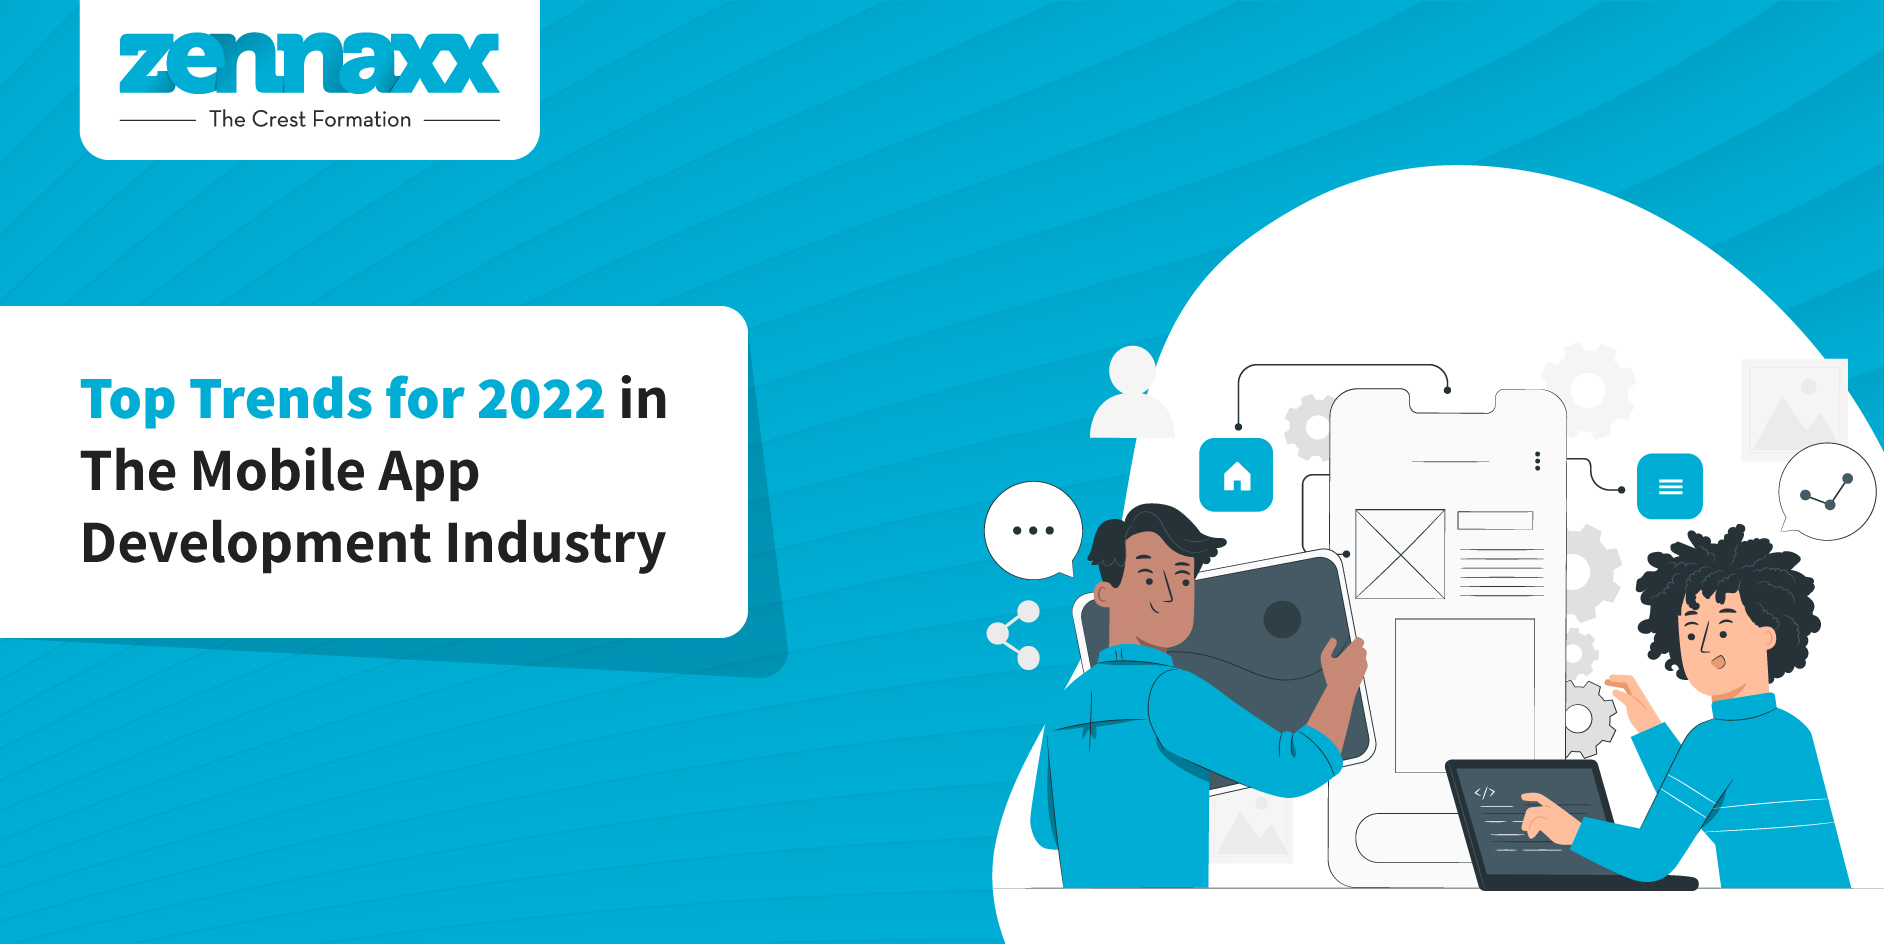 Top Trends for 2022 in The Mobile App Development Industry